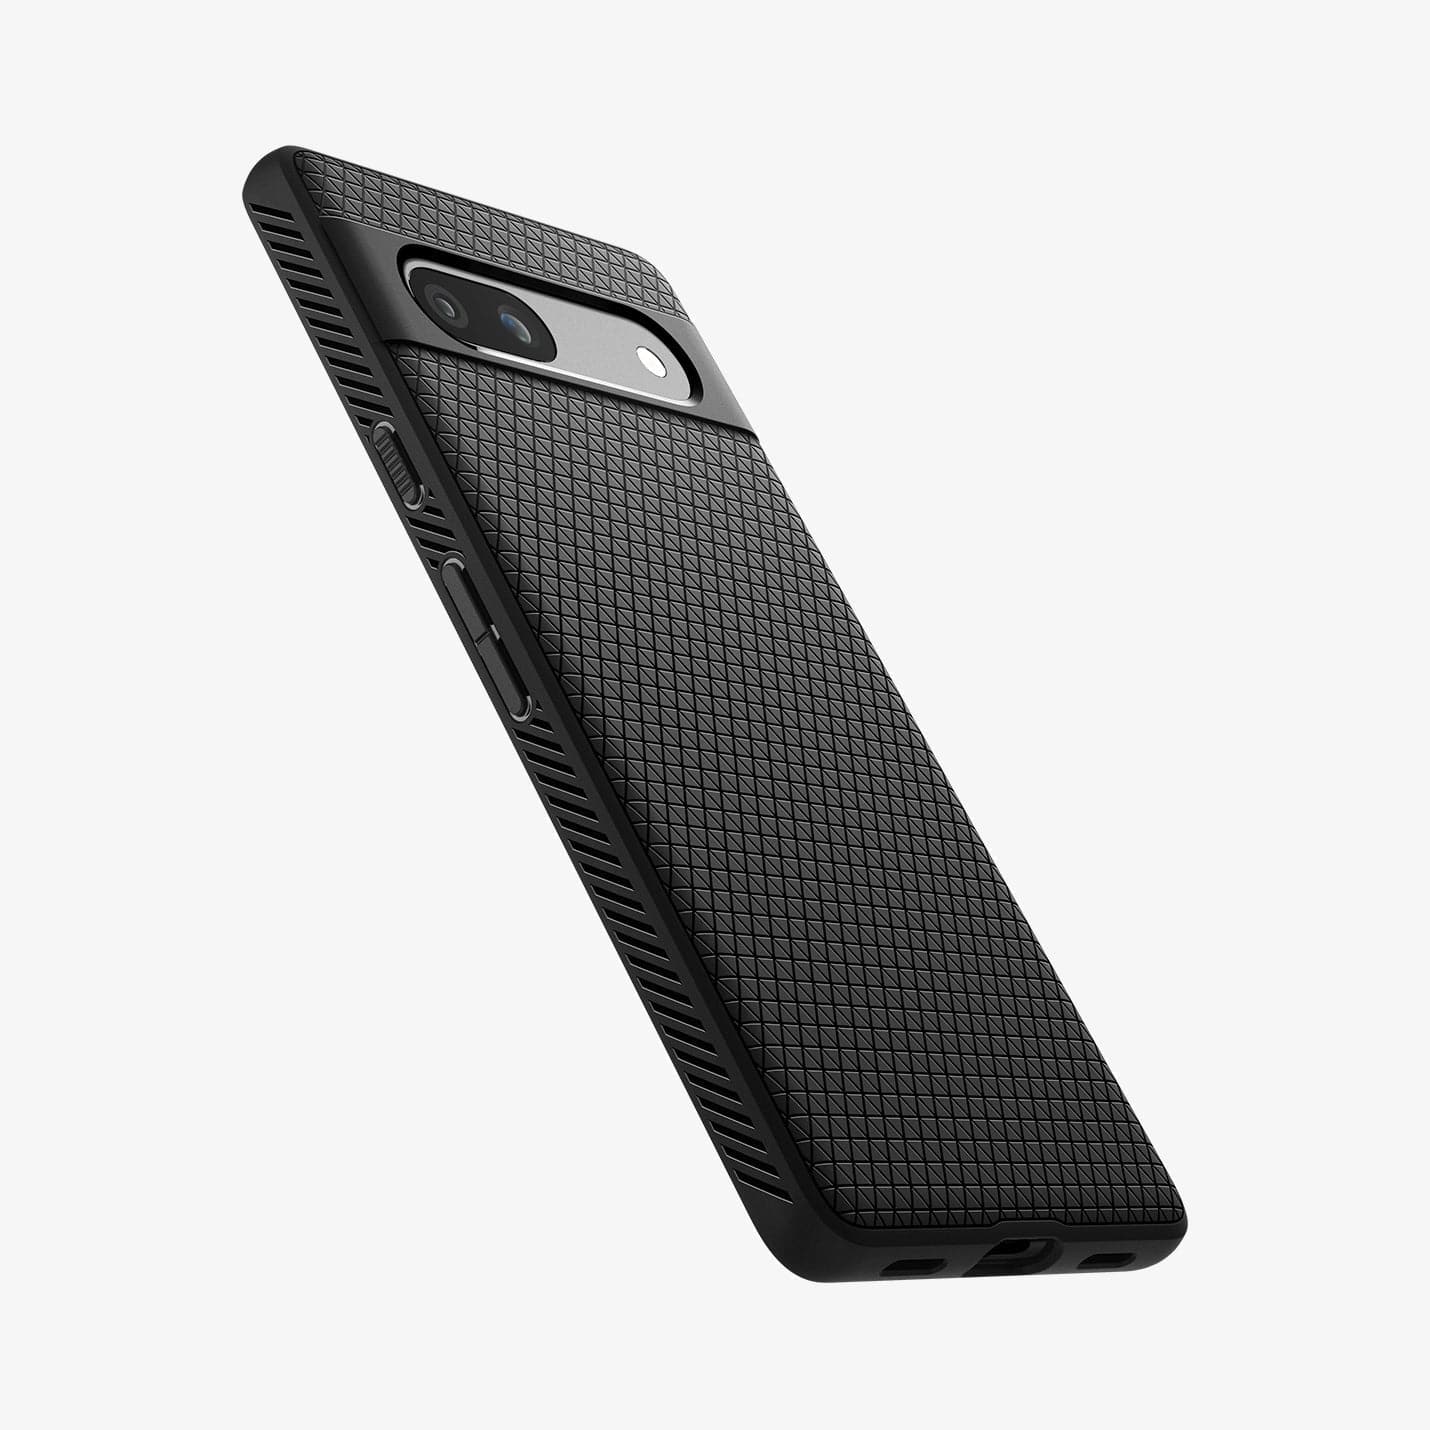 ACS05815 - Pixel 7a Case Liquid Air in matte black showing the side and back